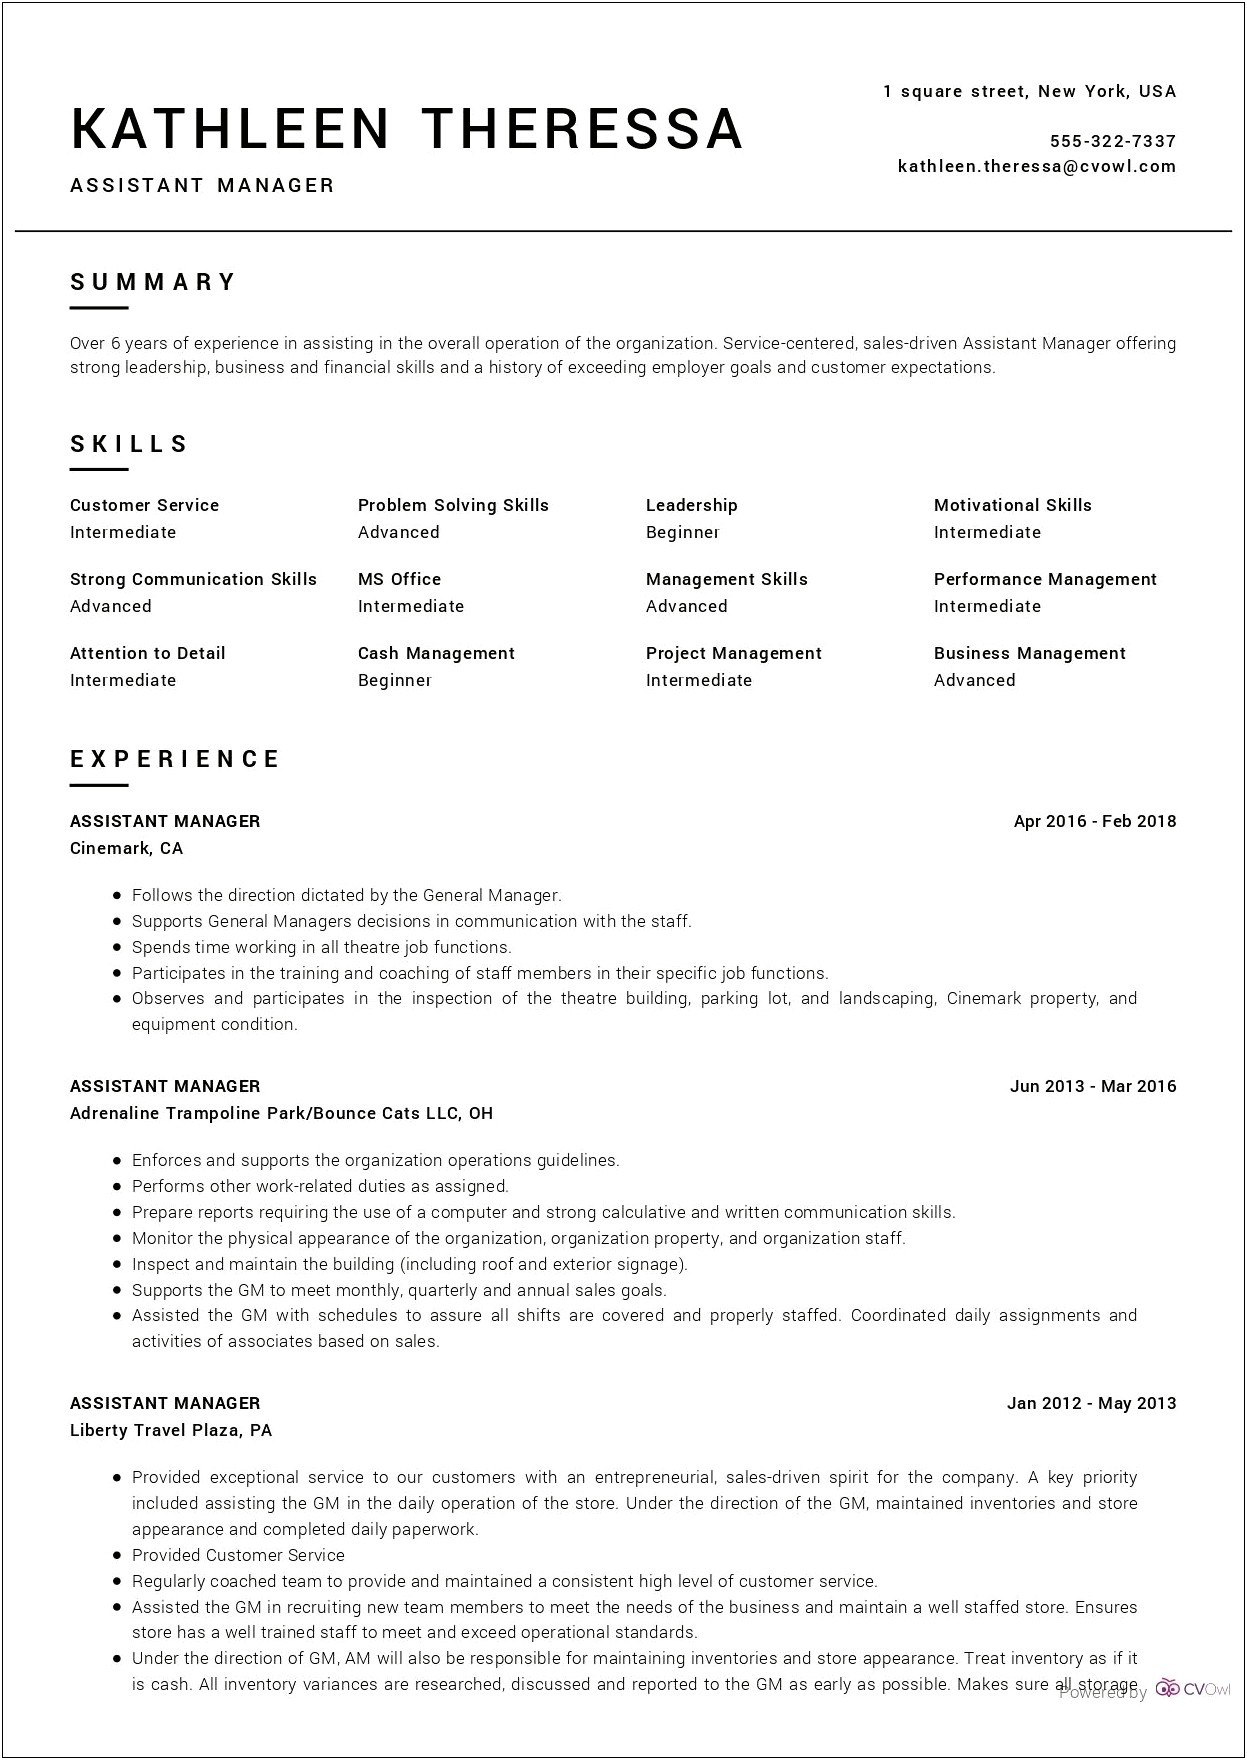 Sample Resumes For Retail Assistant Manager